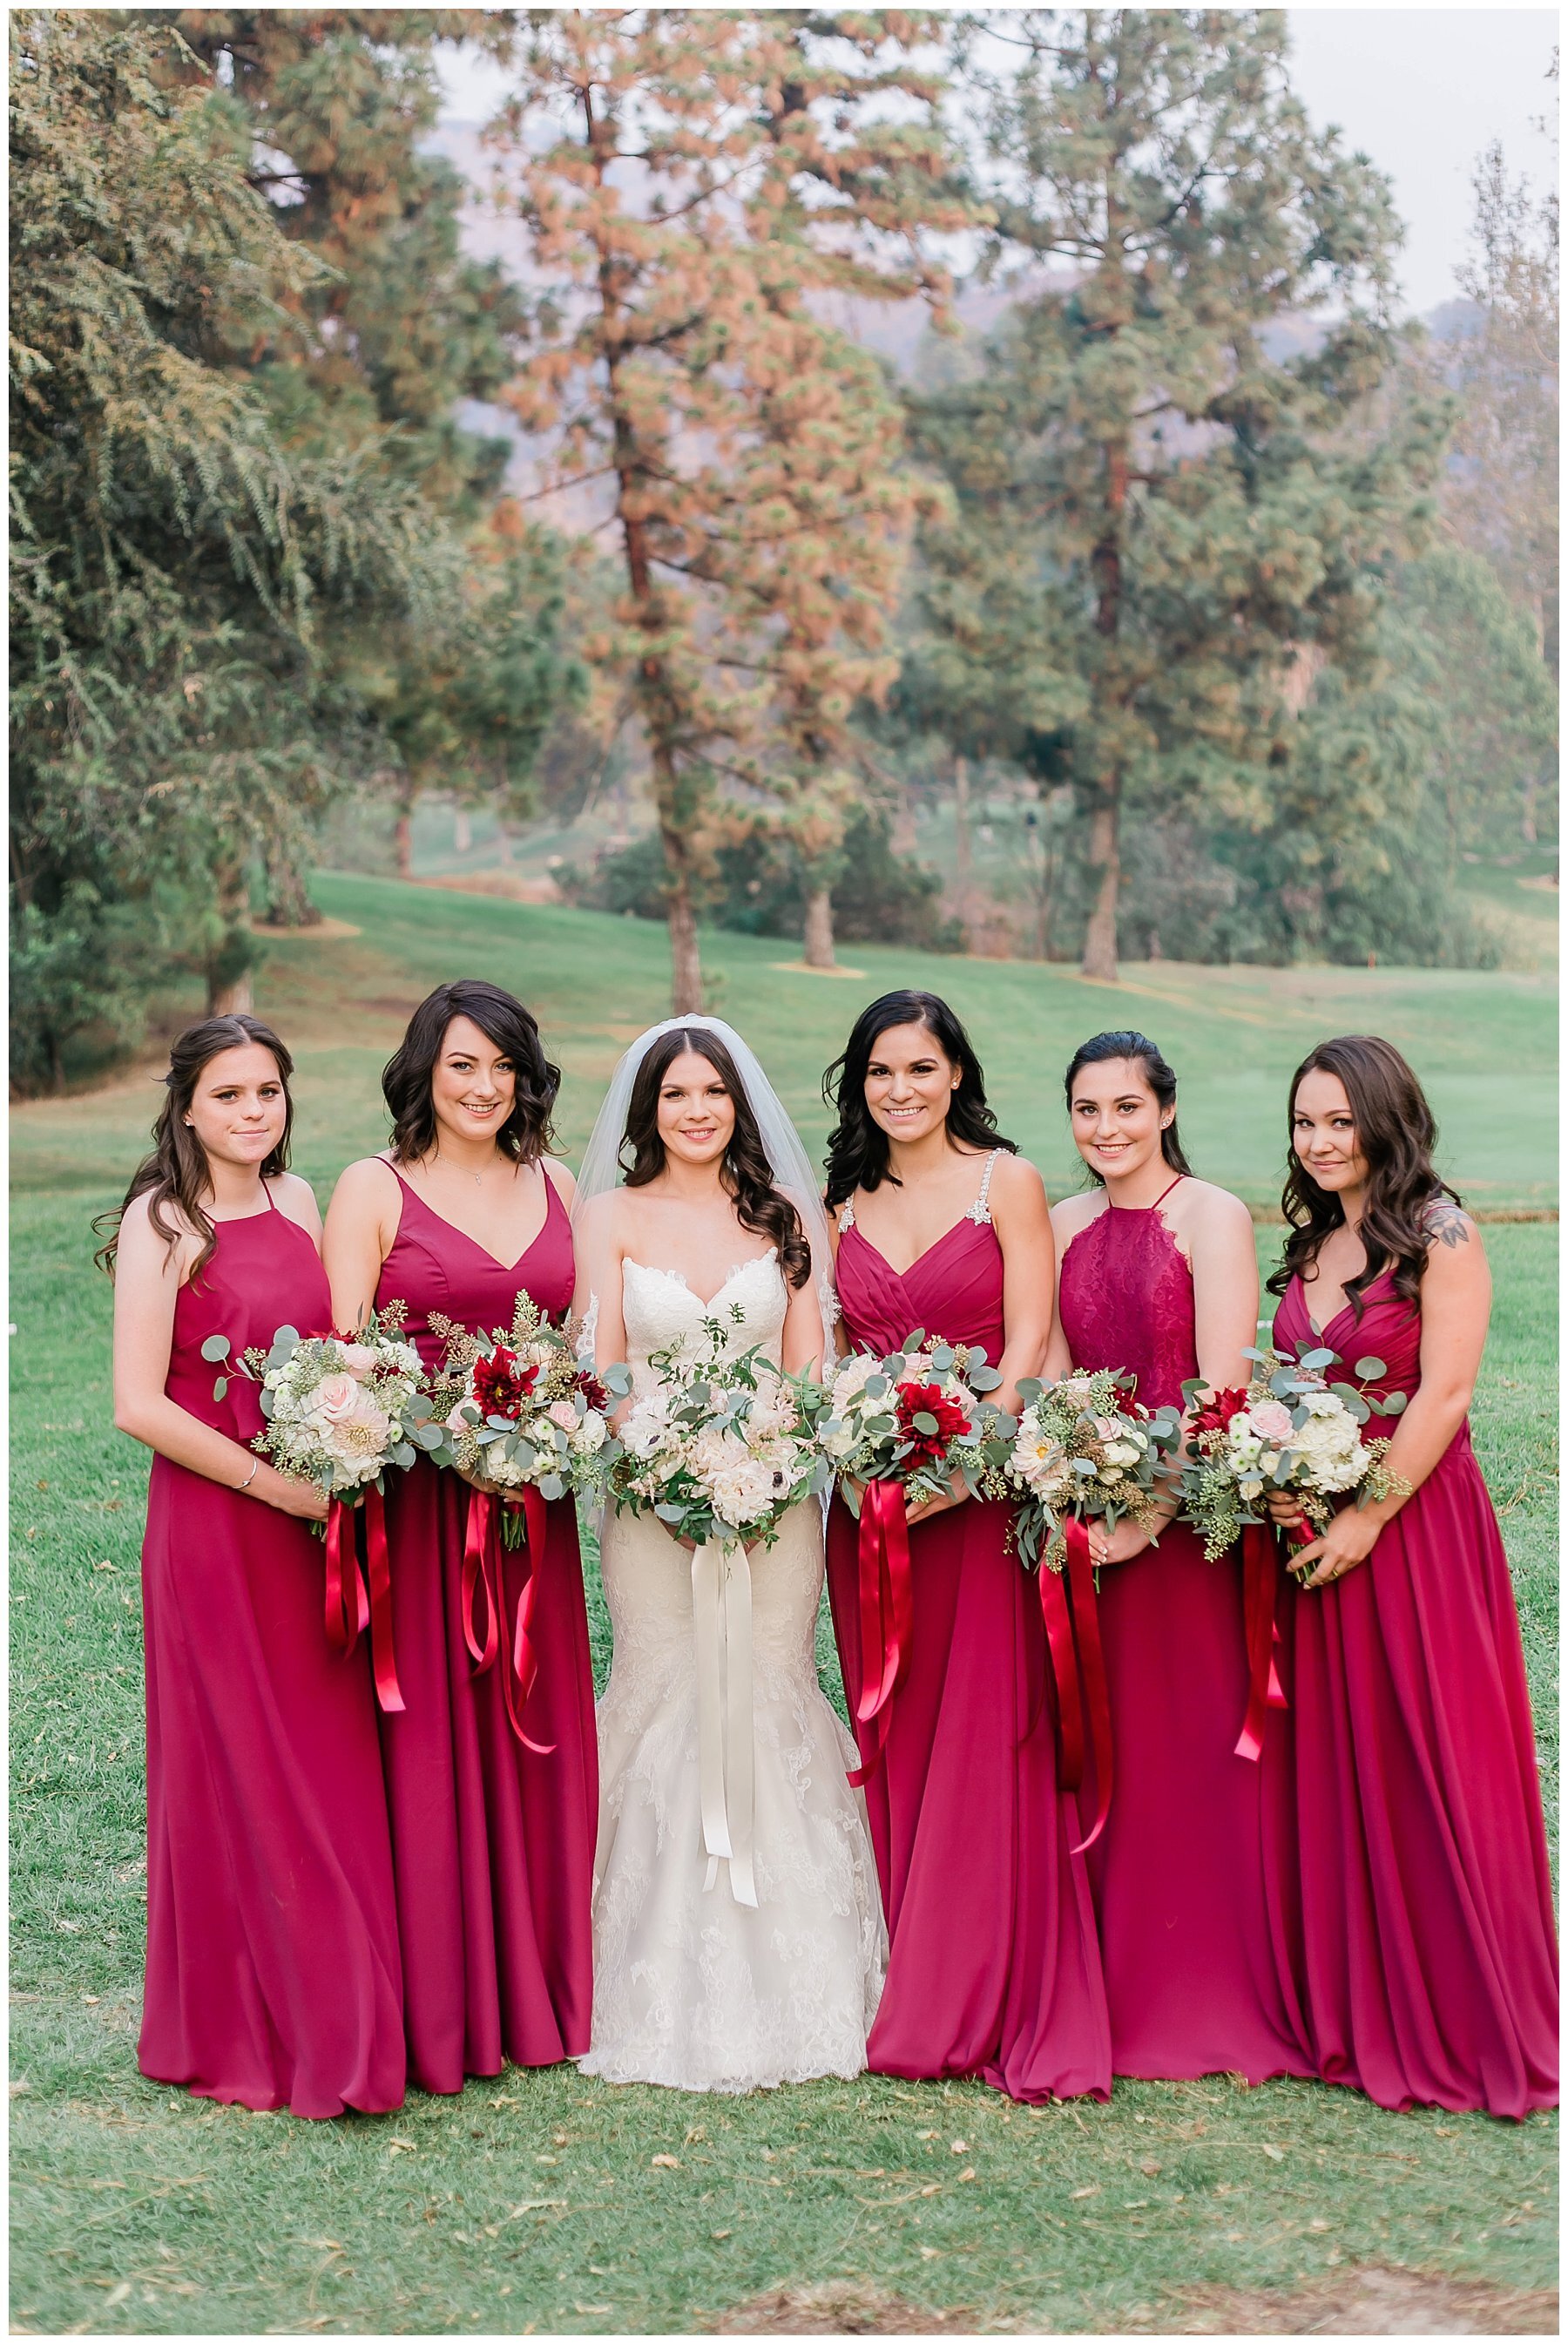  bride and her bridesmaids in front of the golf course trees and greenery 